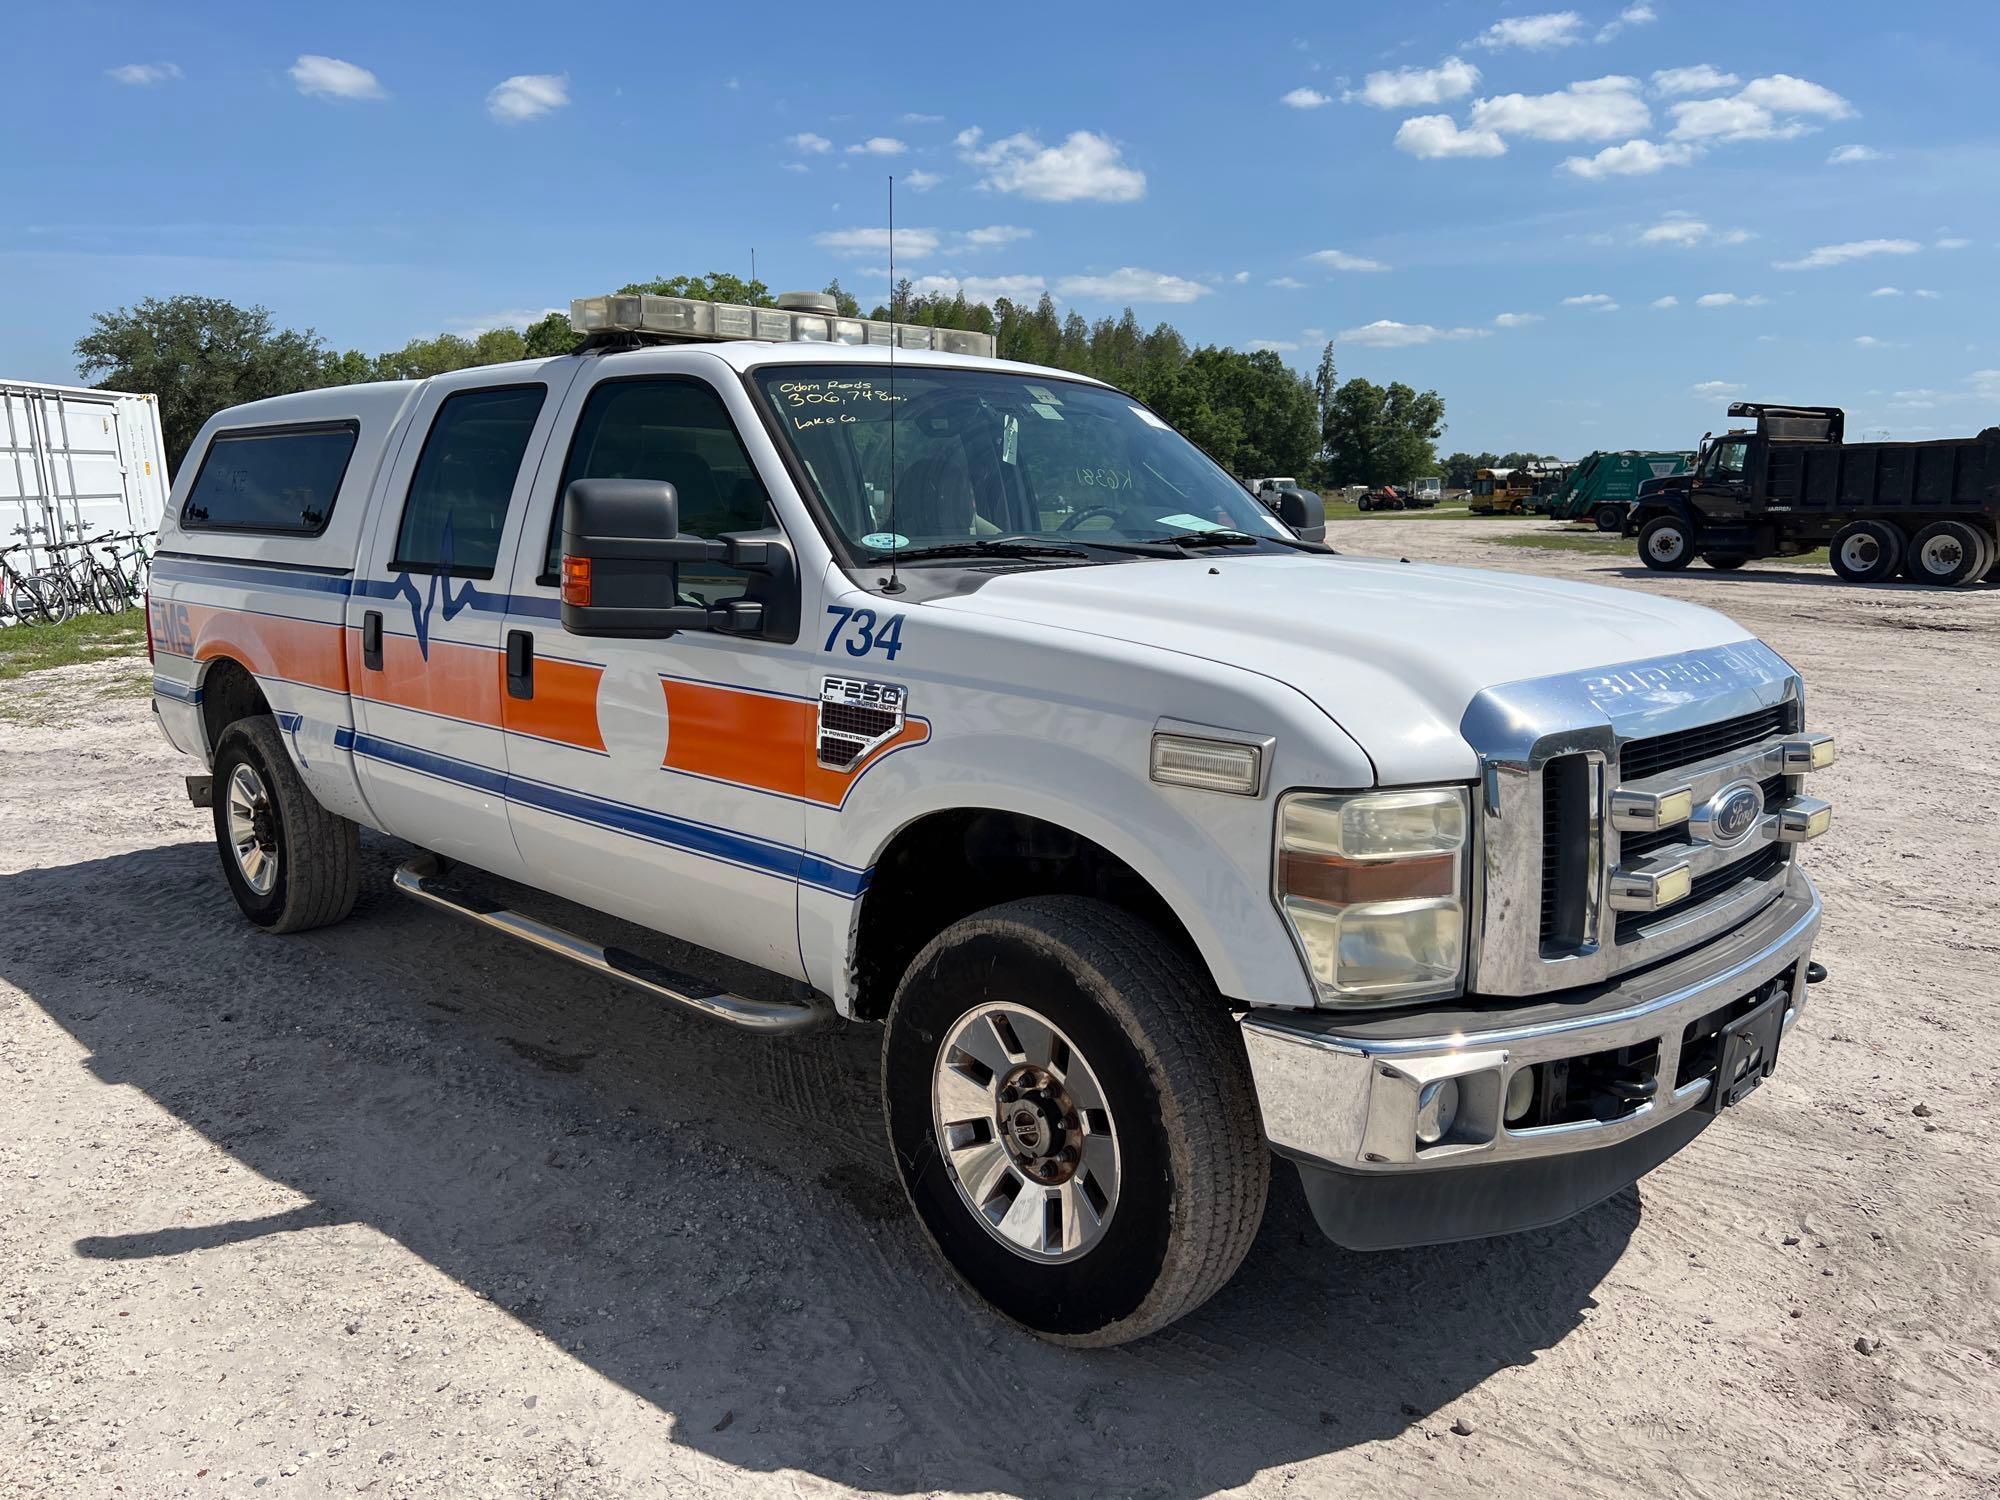 2008 Ford F-250 4x4 Crew Cab Pickup Truck - NO BUYER PREMIUM ON THIS ITEM